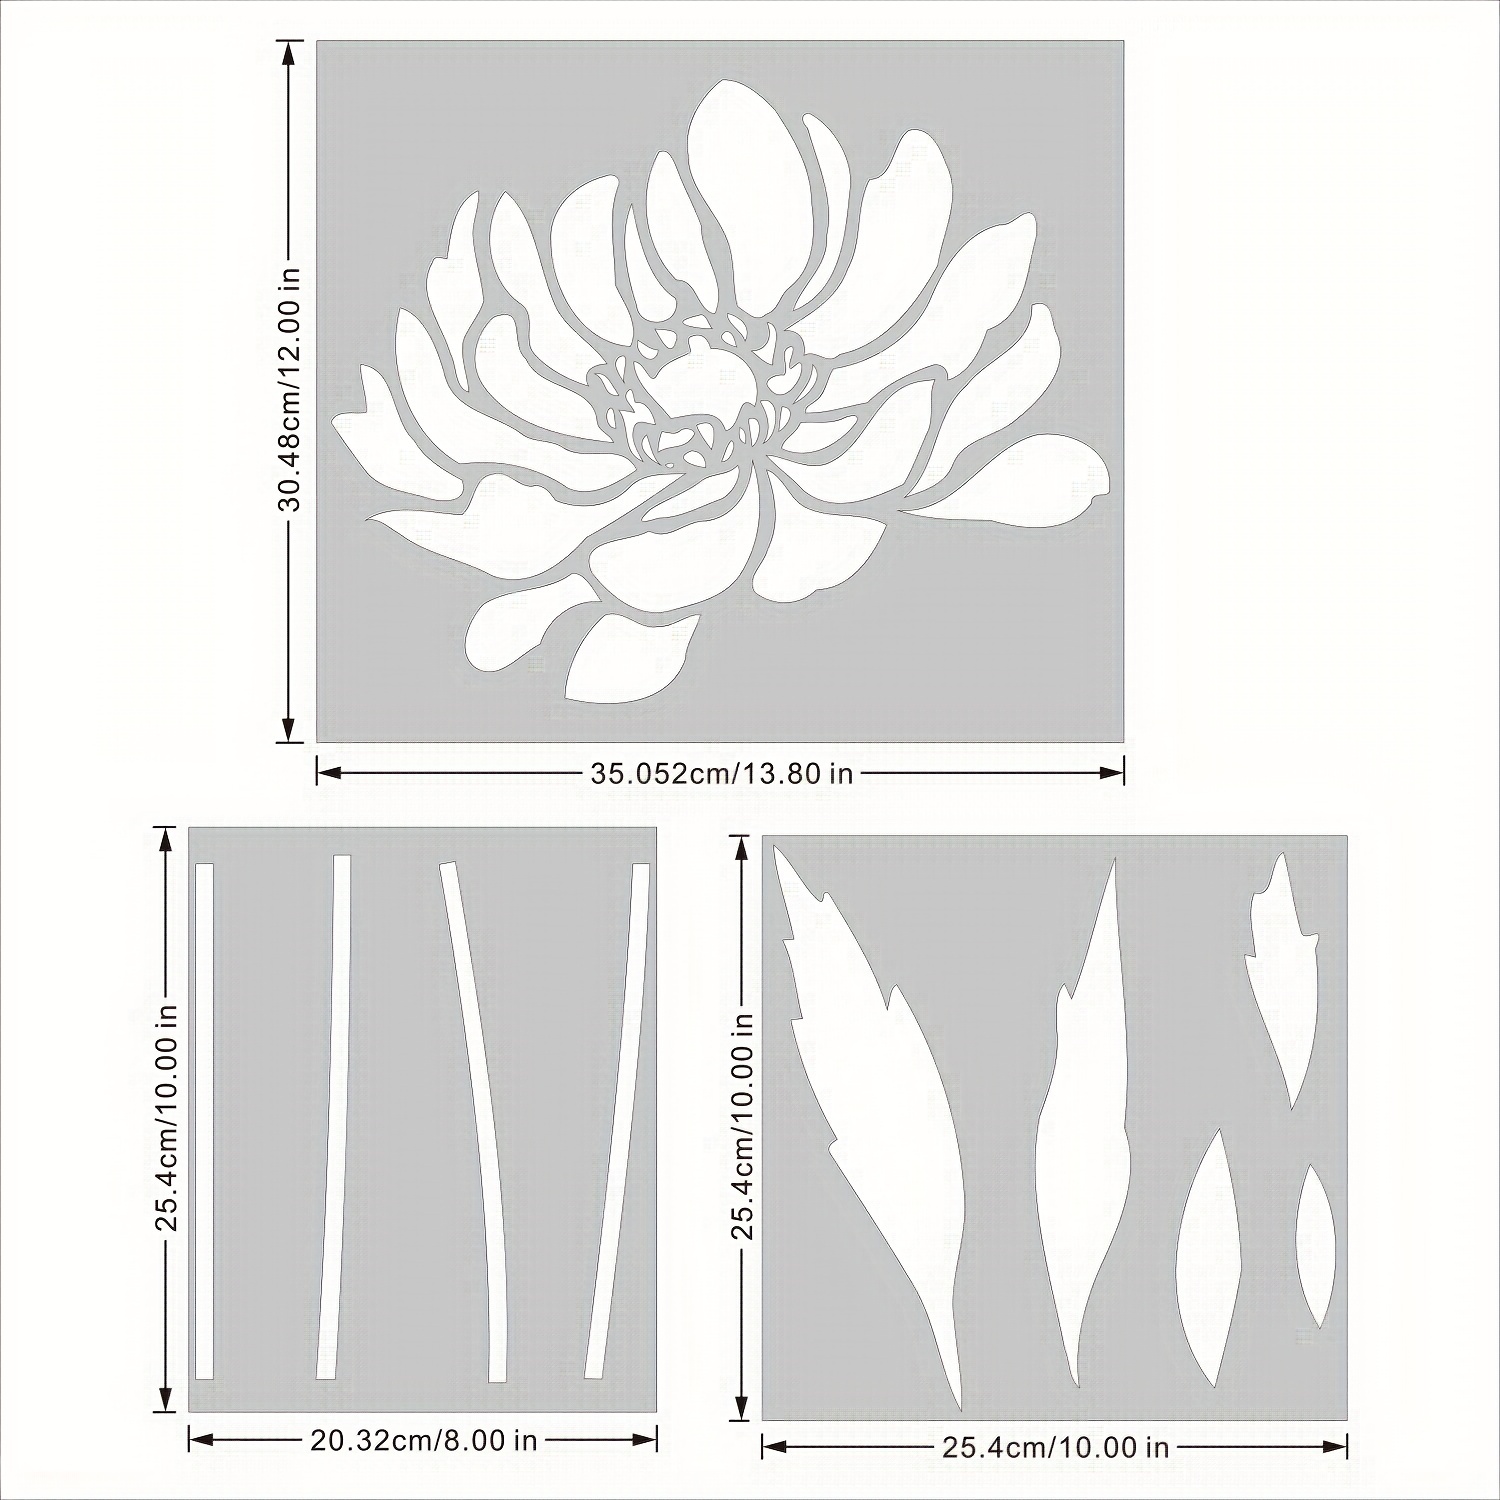 Stem and Leaf Flower stencils for fence painting, wall stenciling and decor